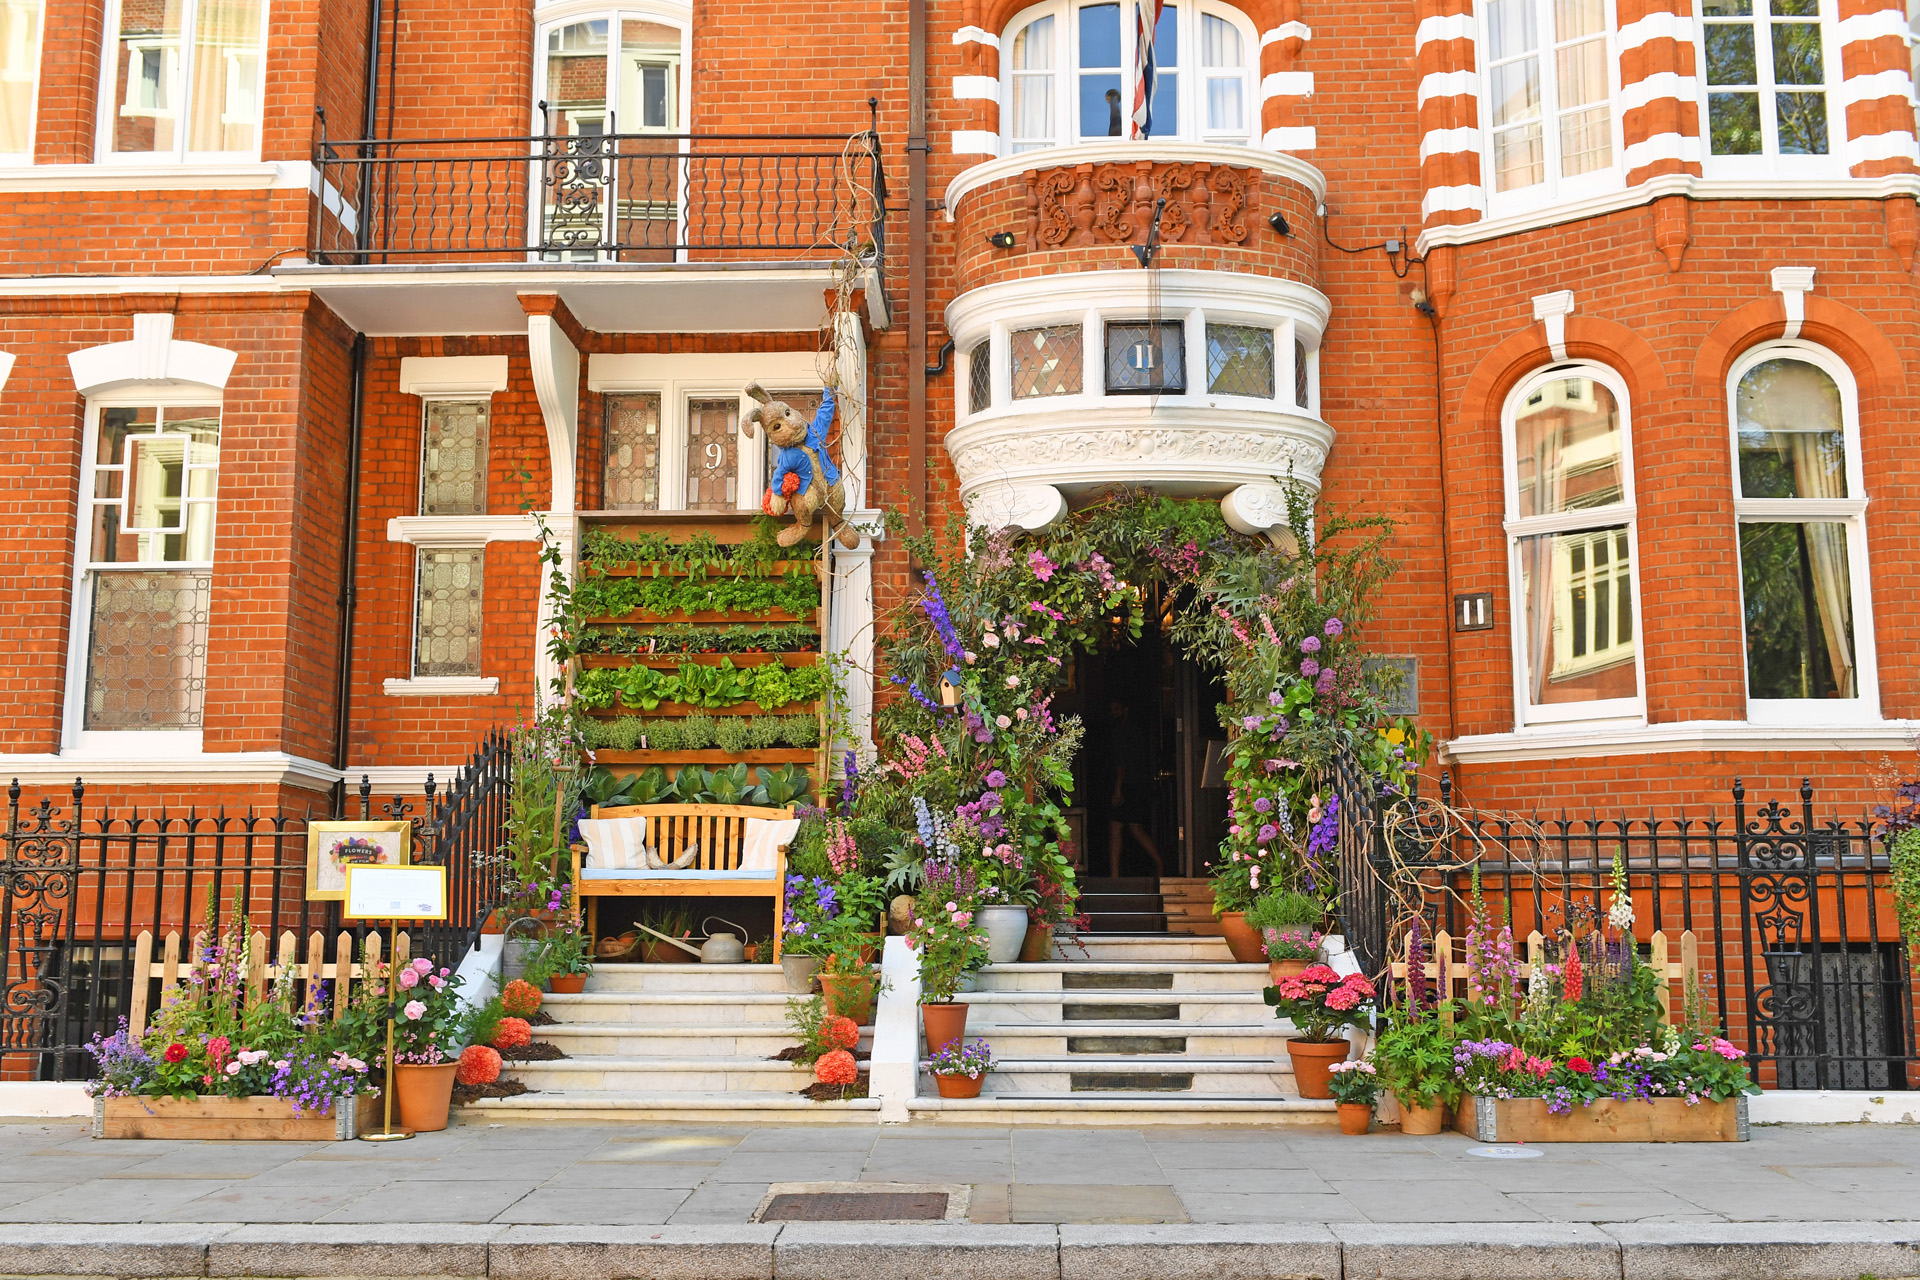 Chelsea in Bloom Launches With Theme "Flowers On Film" In Line With RHS Chelsea Flower Show Launch